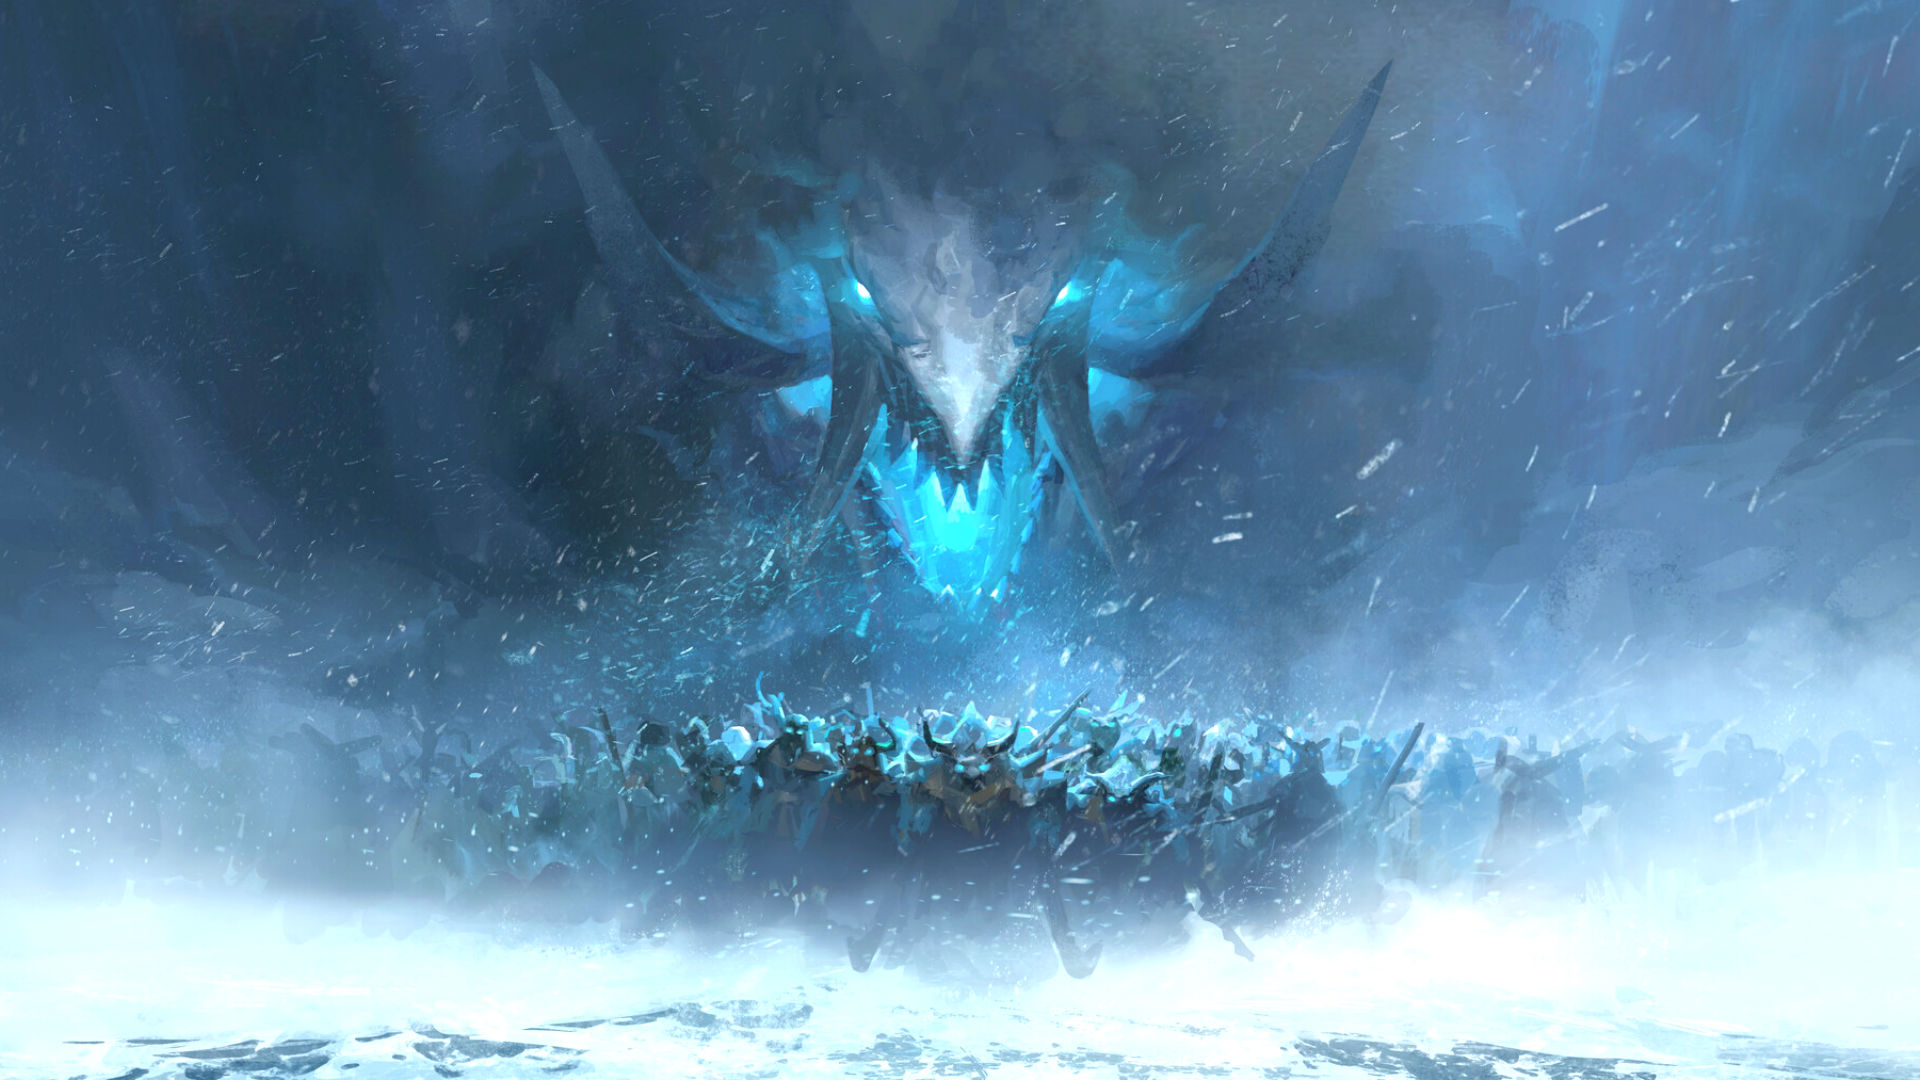 Why Guild Wars 2 The Icebrood Saga Players Should Fear Jormag